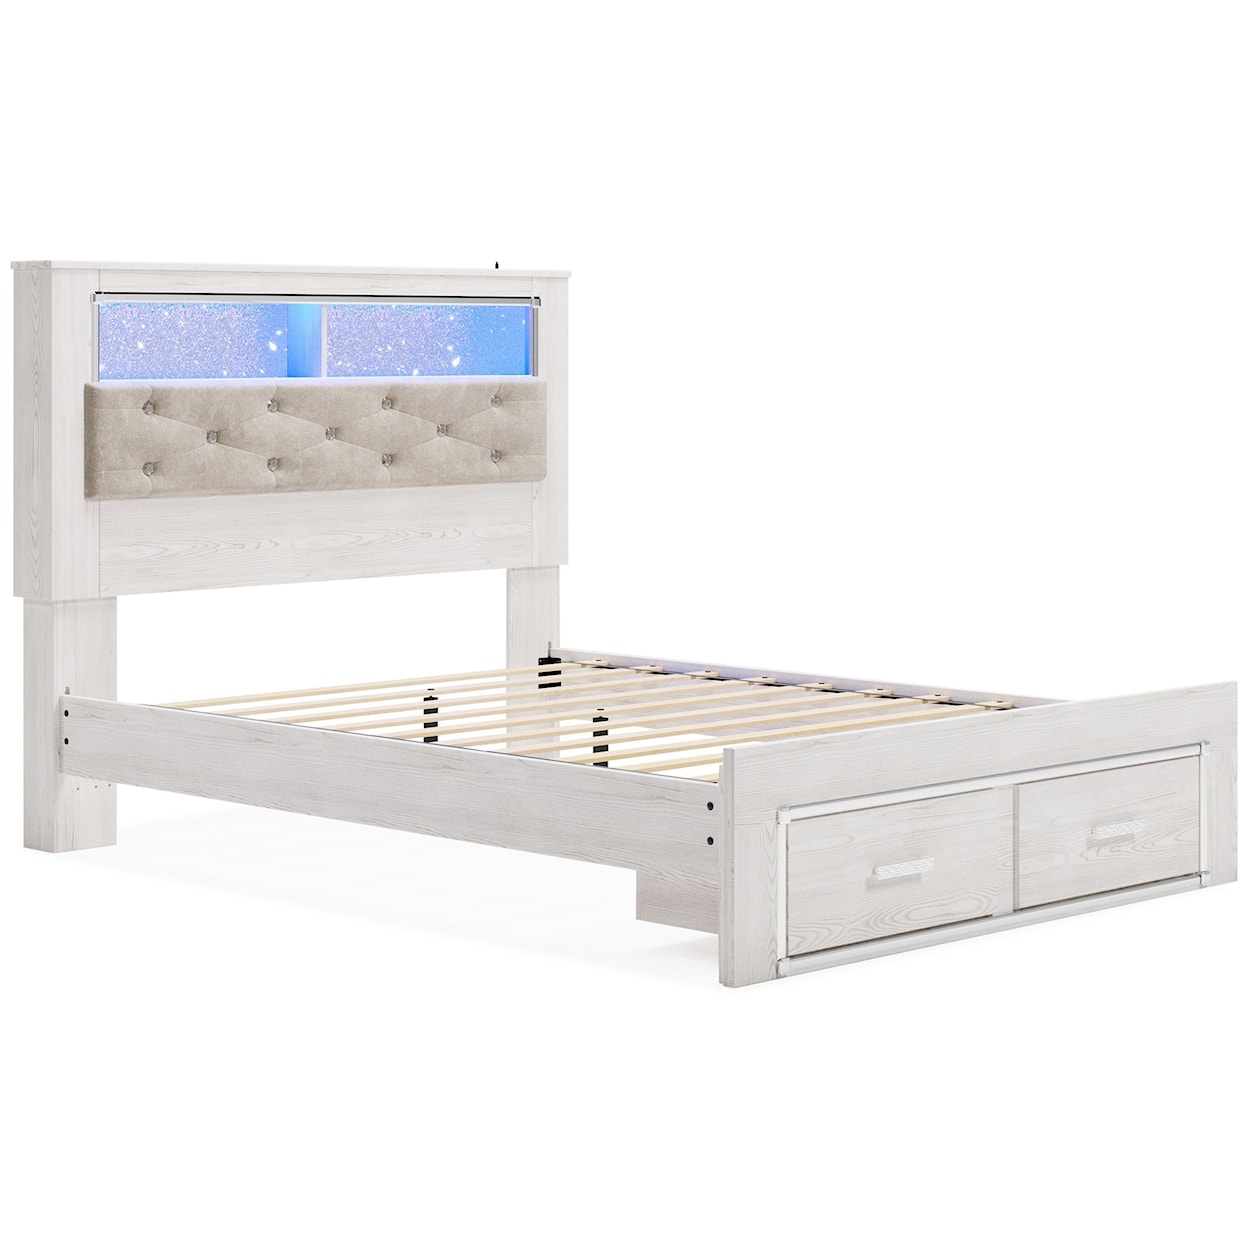 Benchcraft Altyra Queen Storage Bed with Uph Bookcase Hdbd